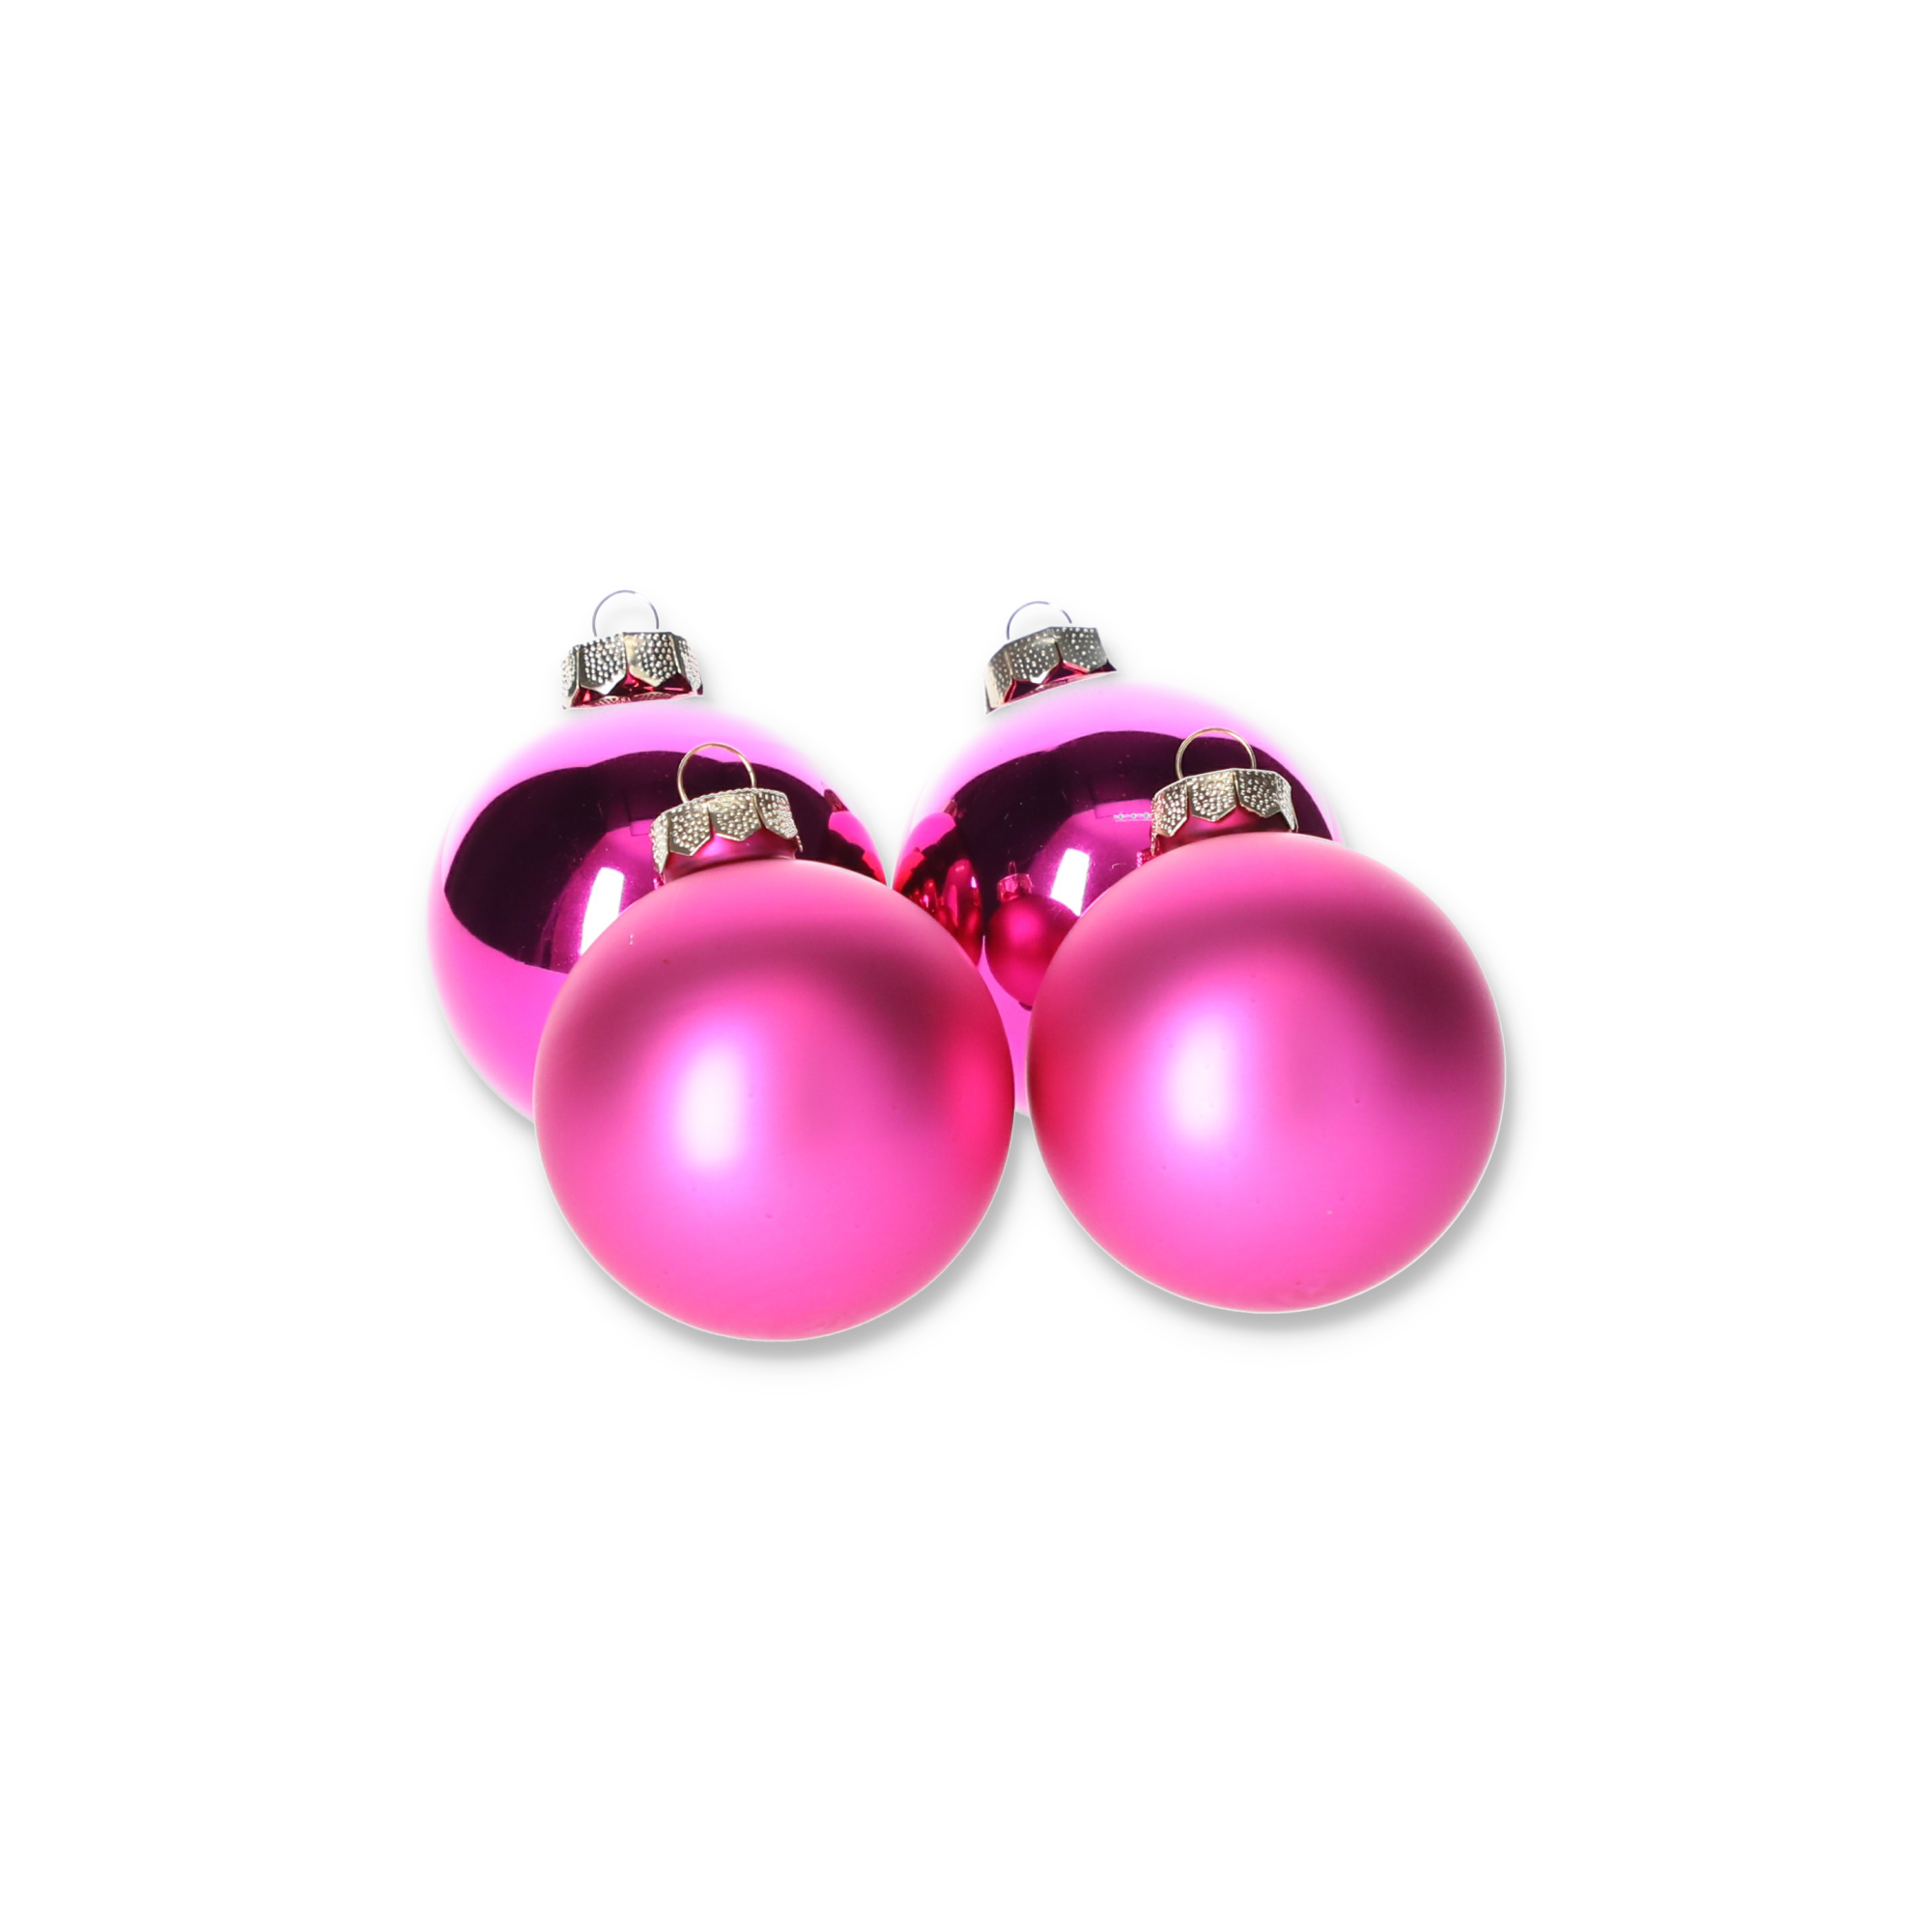 Christbaumkugeln pink Ø 6 cm, 28-teilig + product picture